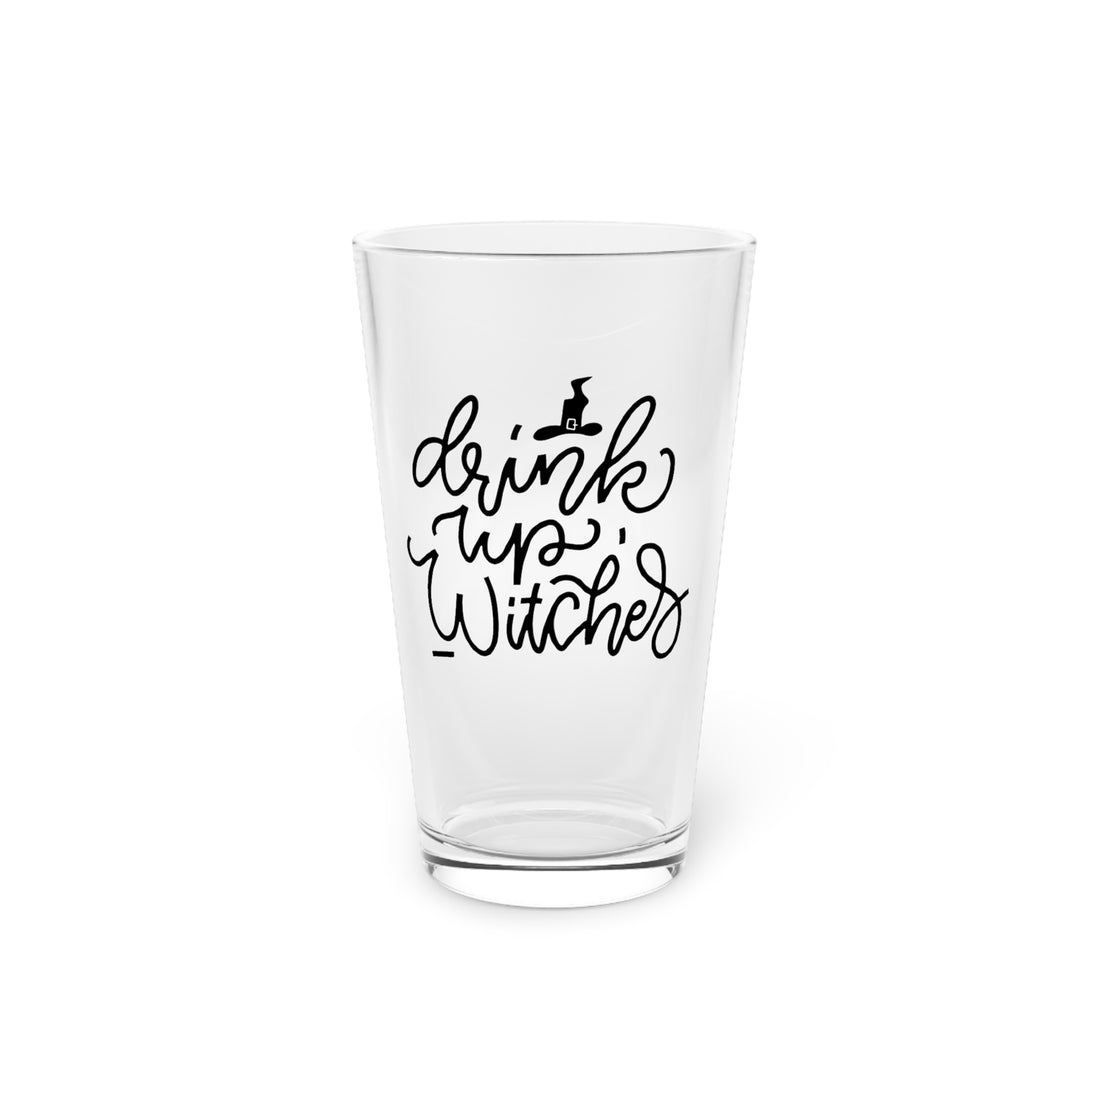 Drink up witches! Halloween Pint Glass, 16oz